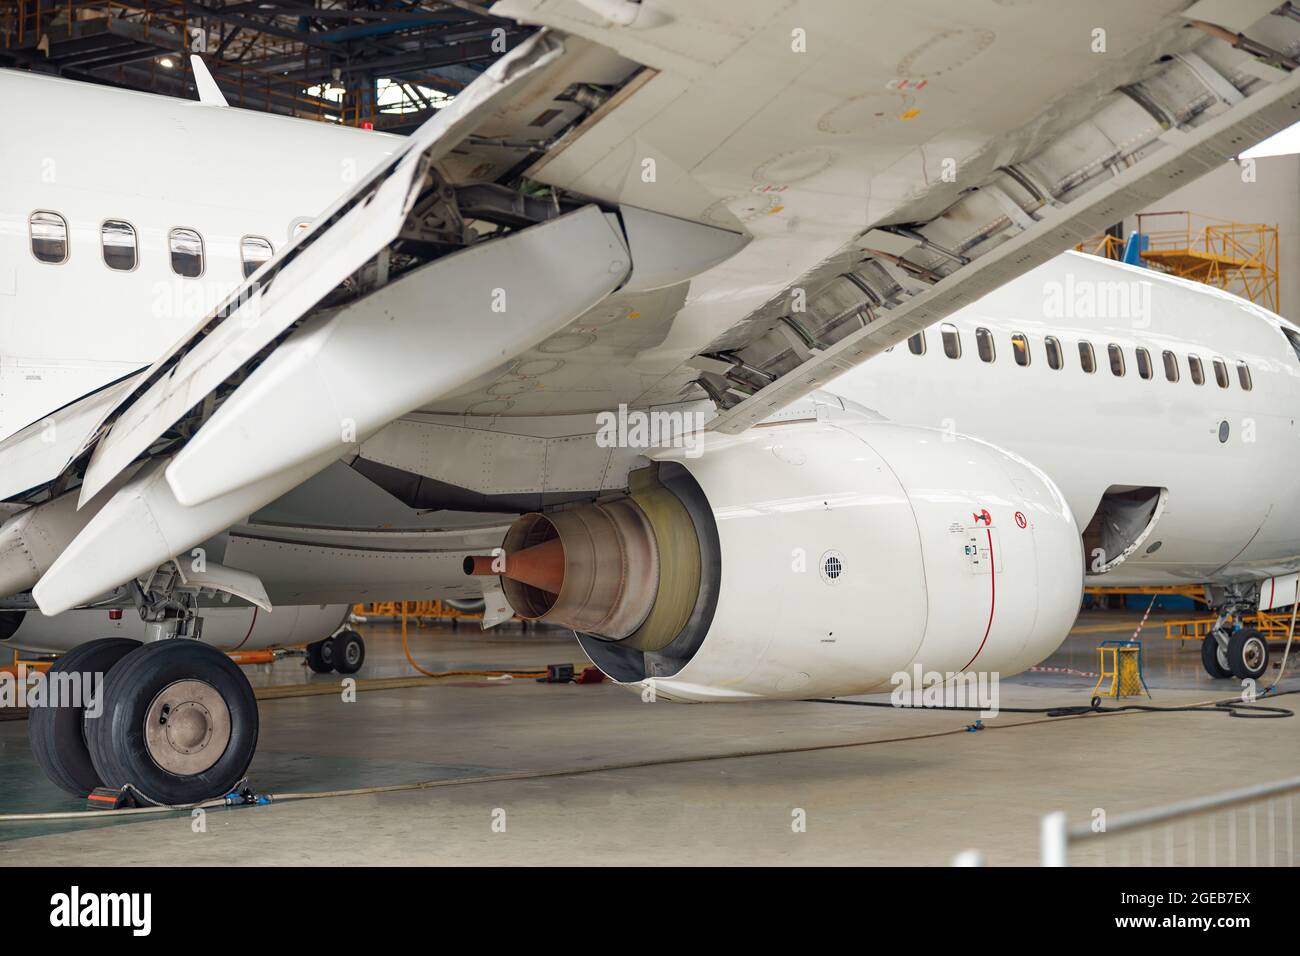 Close up shot of aircraft engine jet under maintenance in the hangar indoors Stock Photo